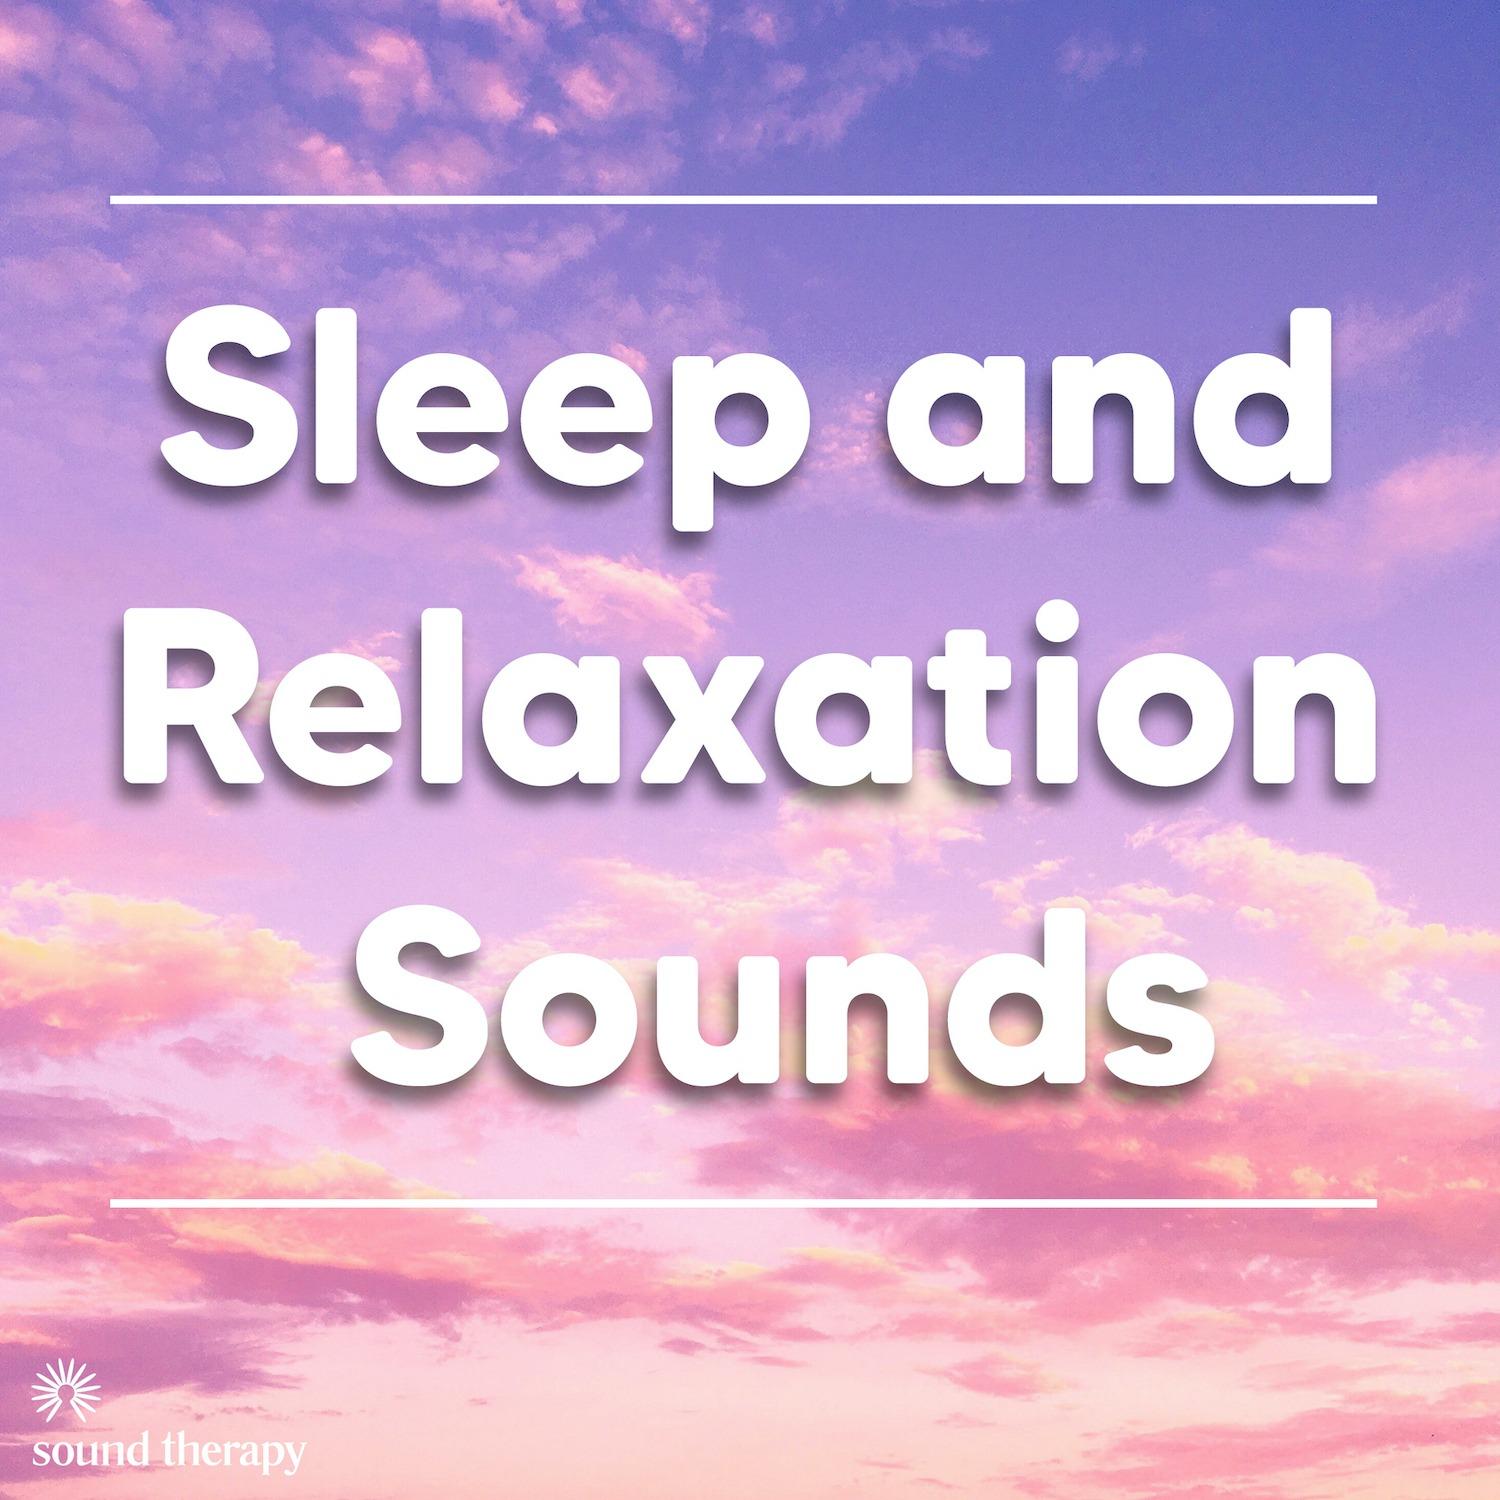 White Noise Sound for Sleep - Ambient Noise for Deep Sleep, Relaxation, Tinnitus Relief - 1 Hour